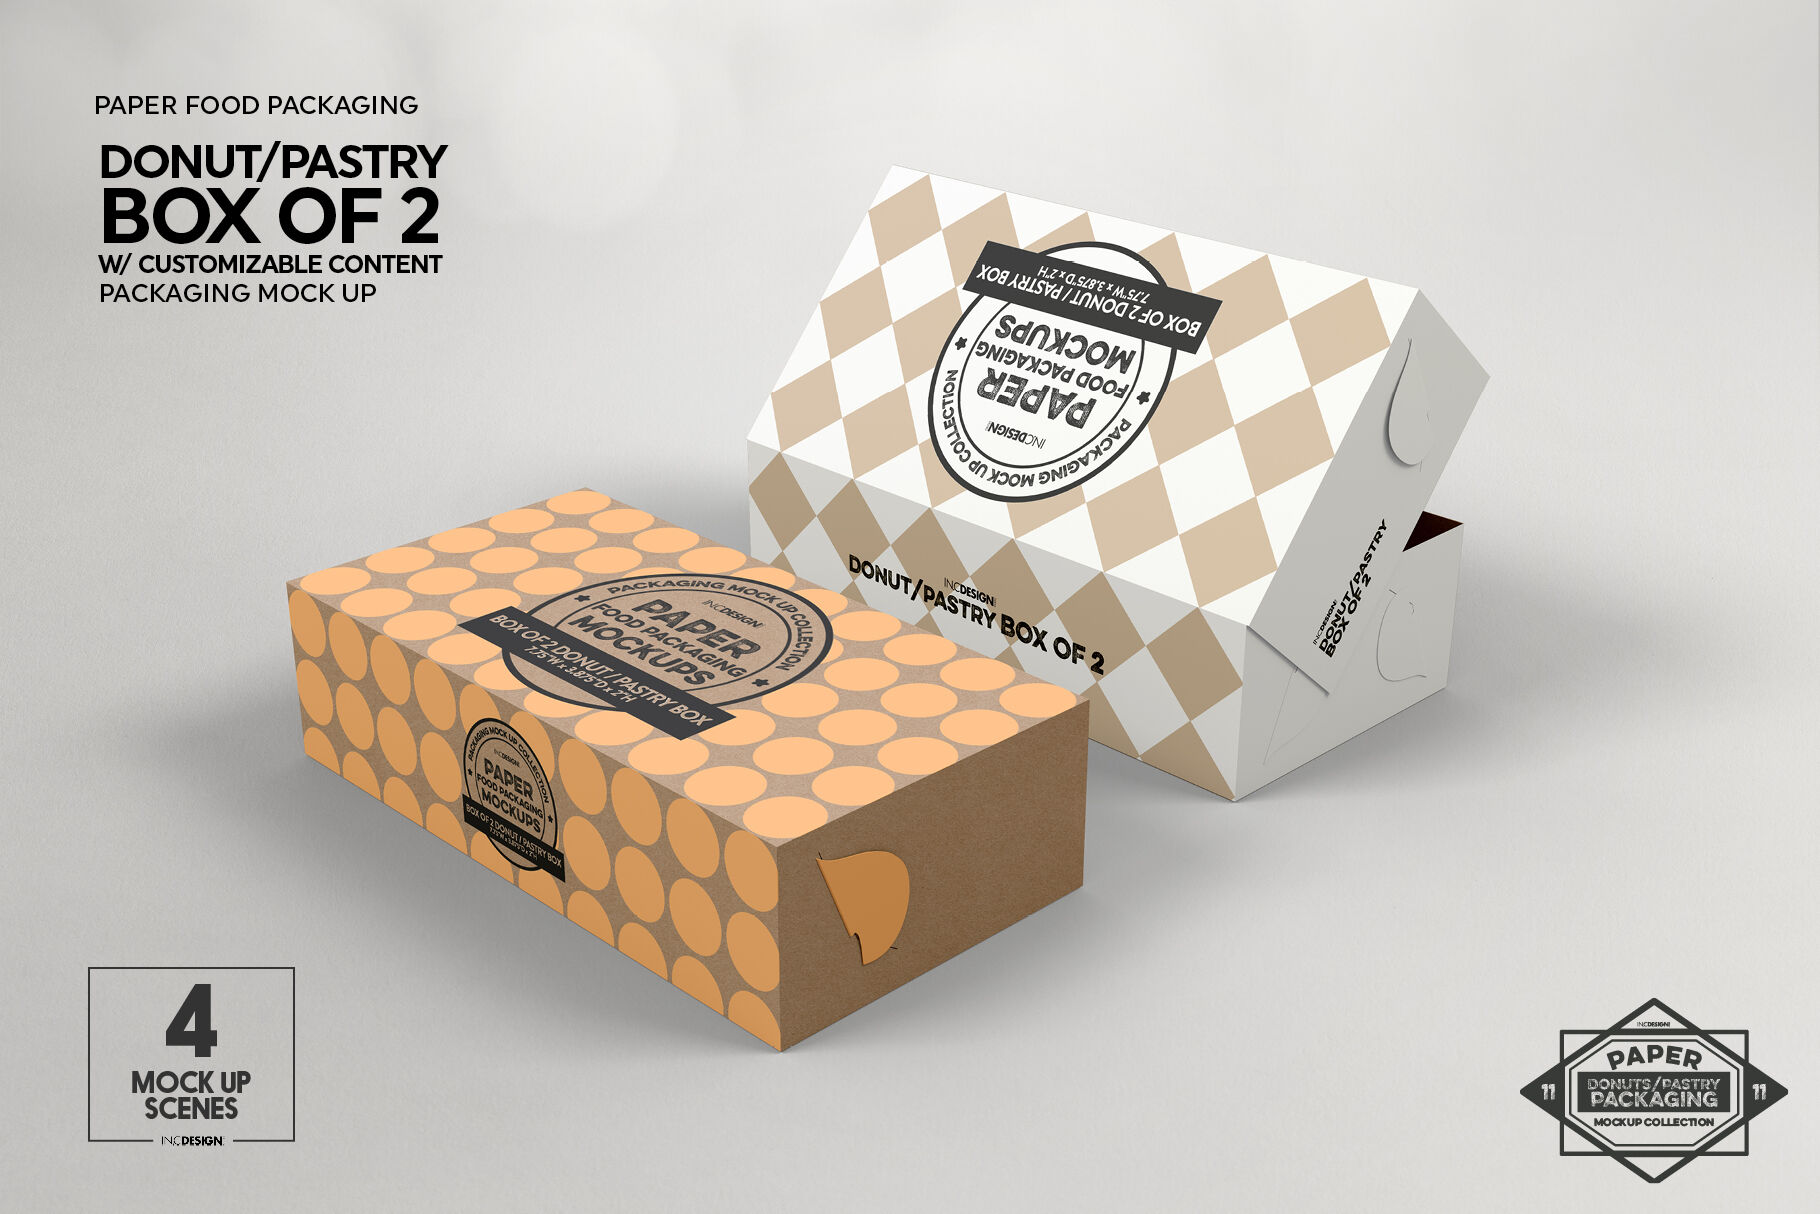 Download Box of Two Donut Pastry Box Mockup By INC Design Studio | TheHungryJPEG.com